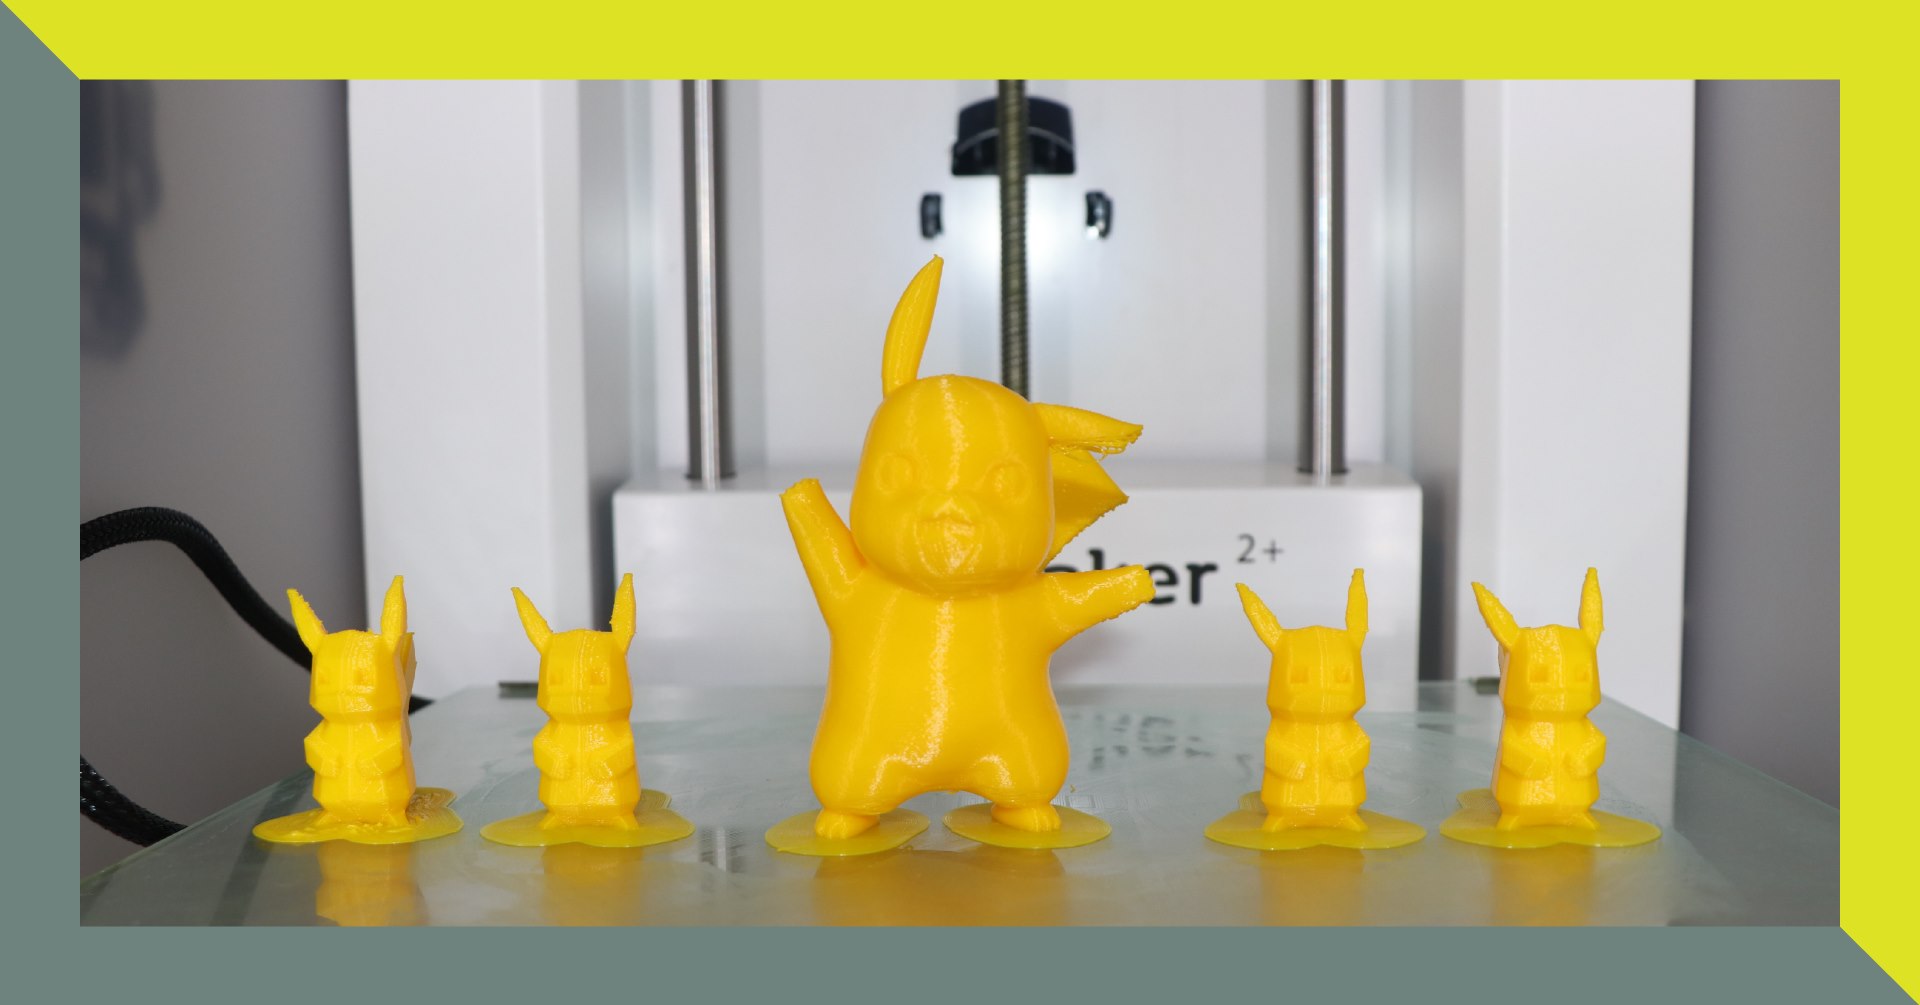 3D modelling & printing open day